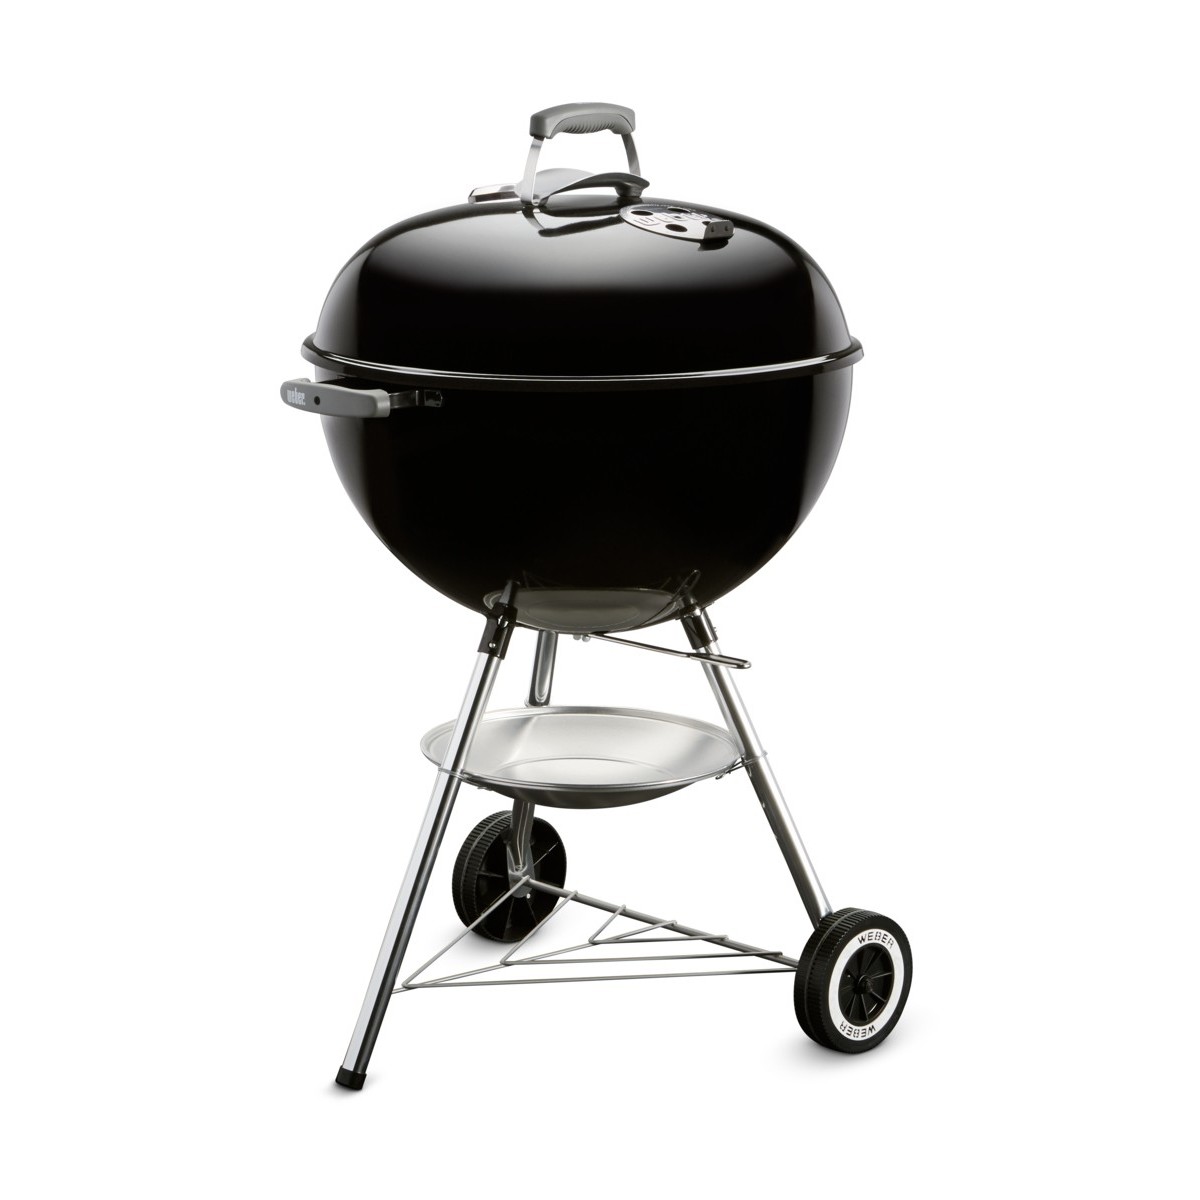 WEBER Charcoal barbecue Classic Kettle, 57cm, Black 1341504